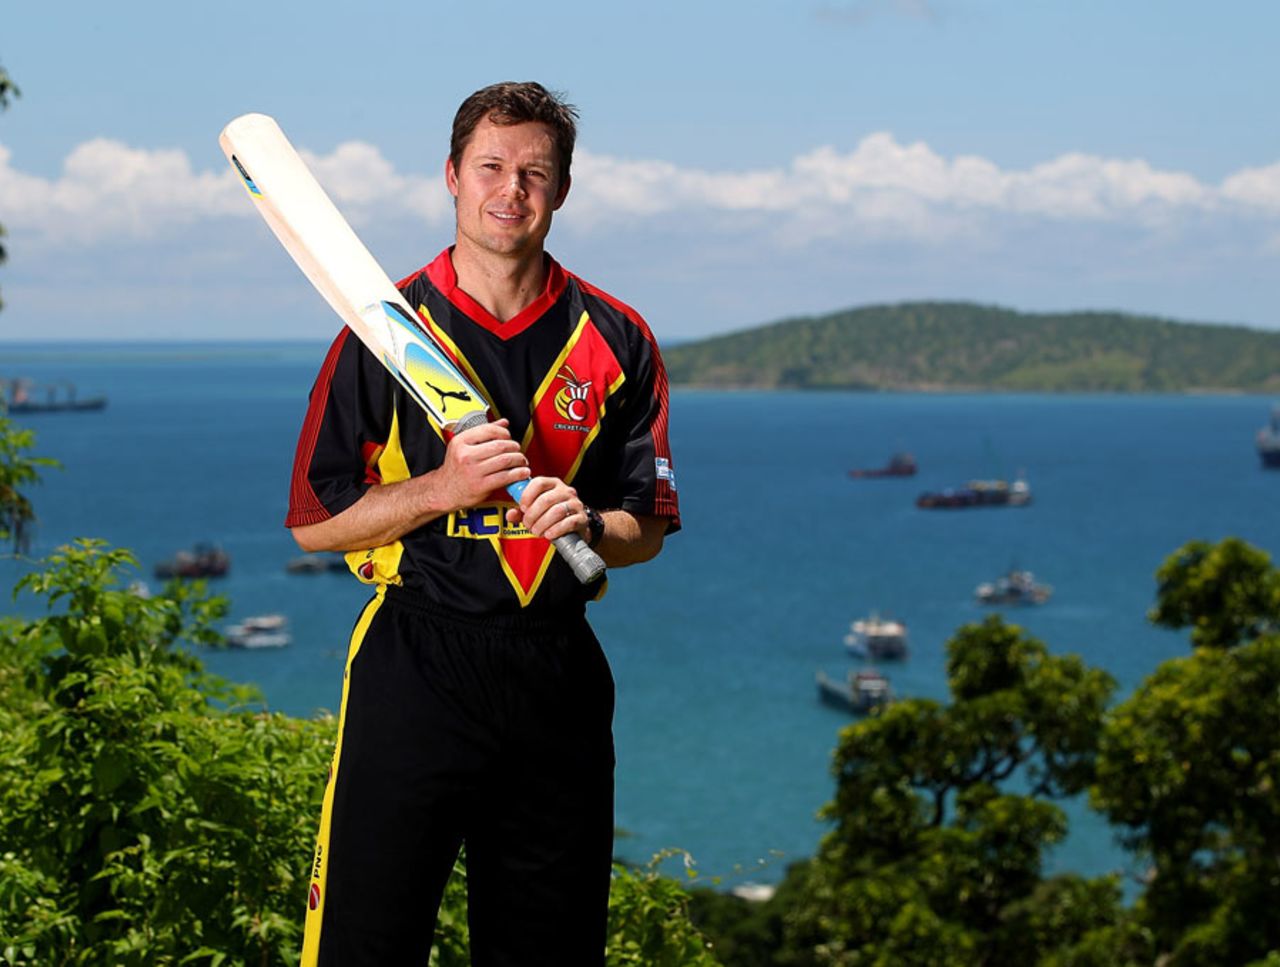 Geraint Jones will join the Papua New Guinea T20 team, Port Moresby, February 24, 2012